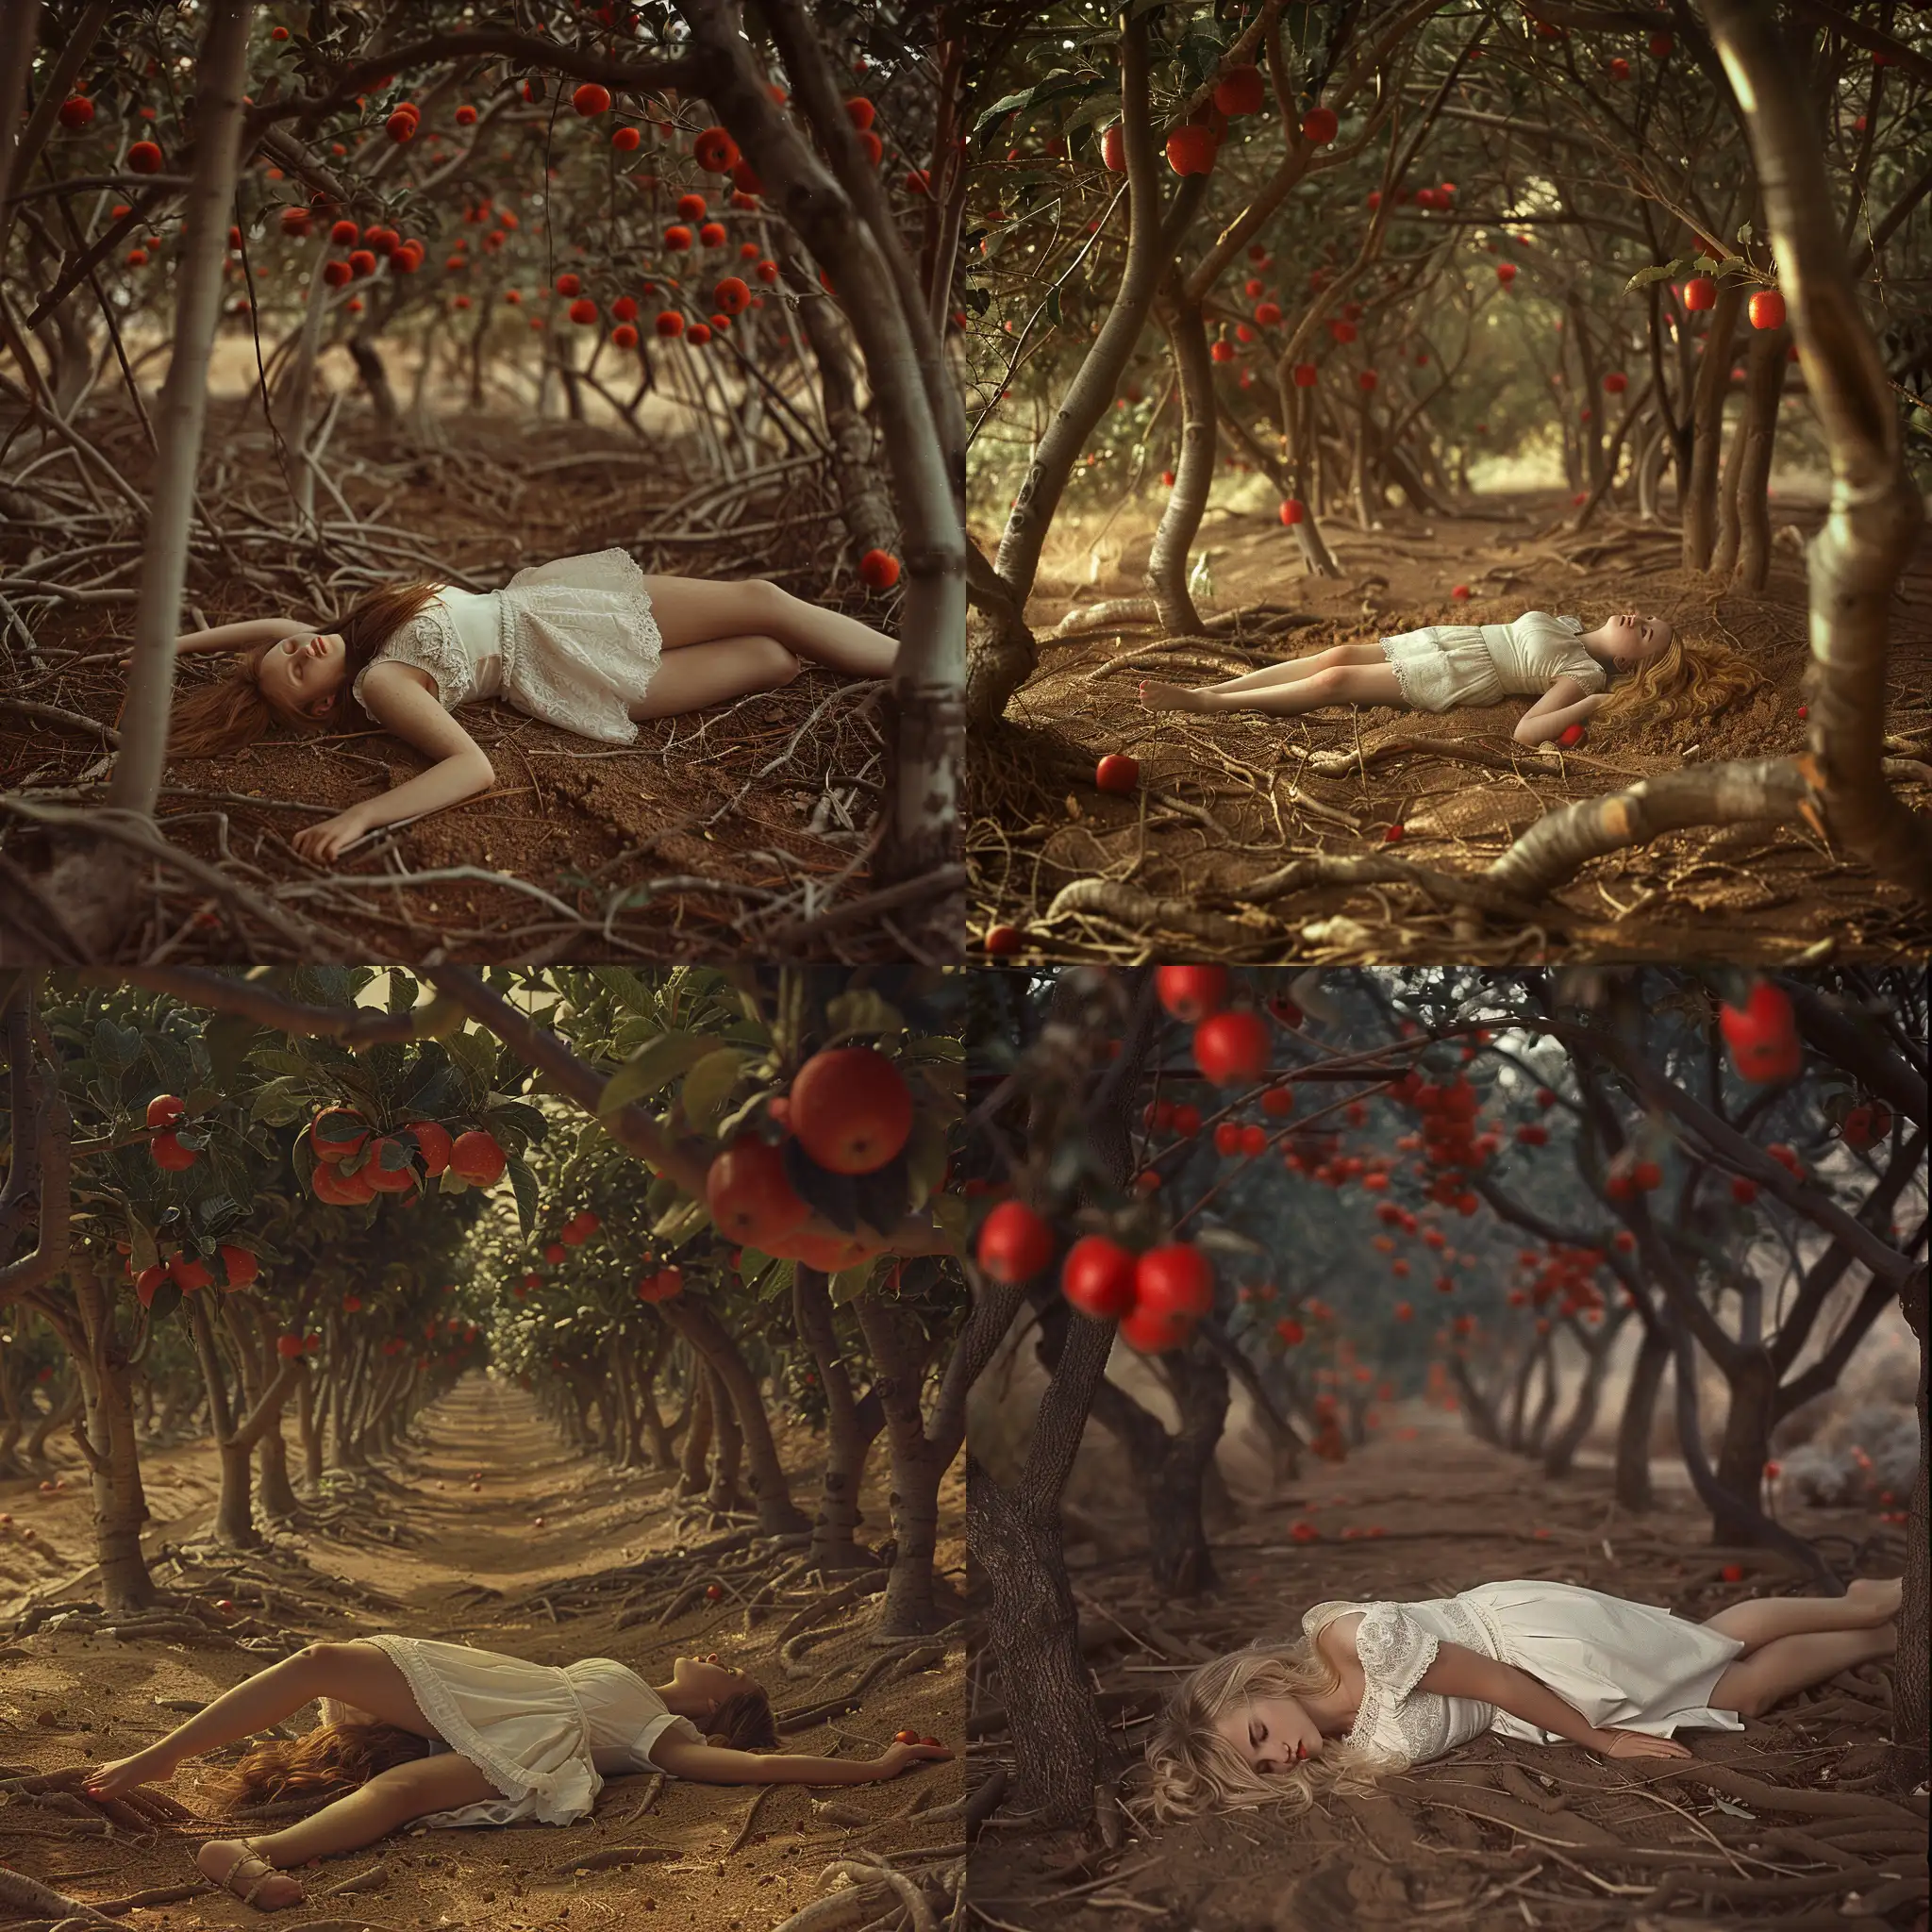 Girl-in-White-Dress-Surrounded-by-Apple-Trees-in-Alan-Lee-Style